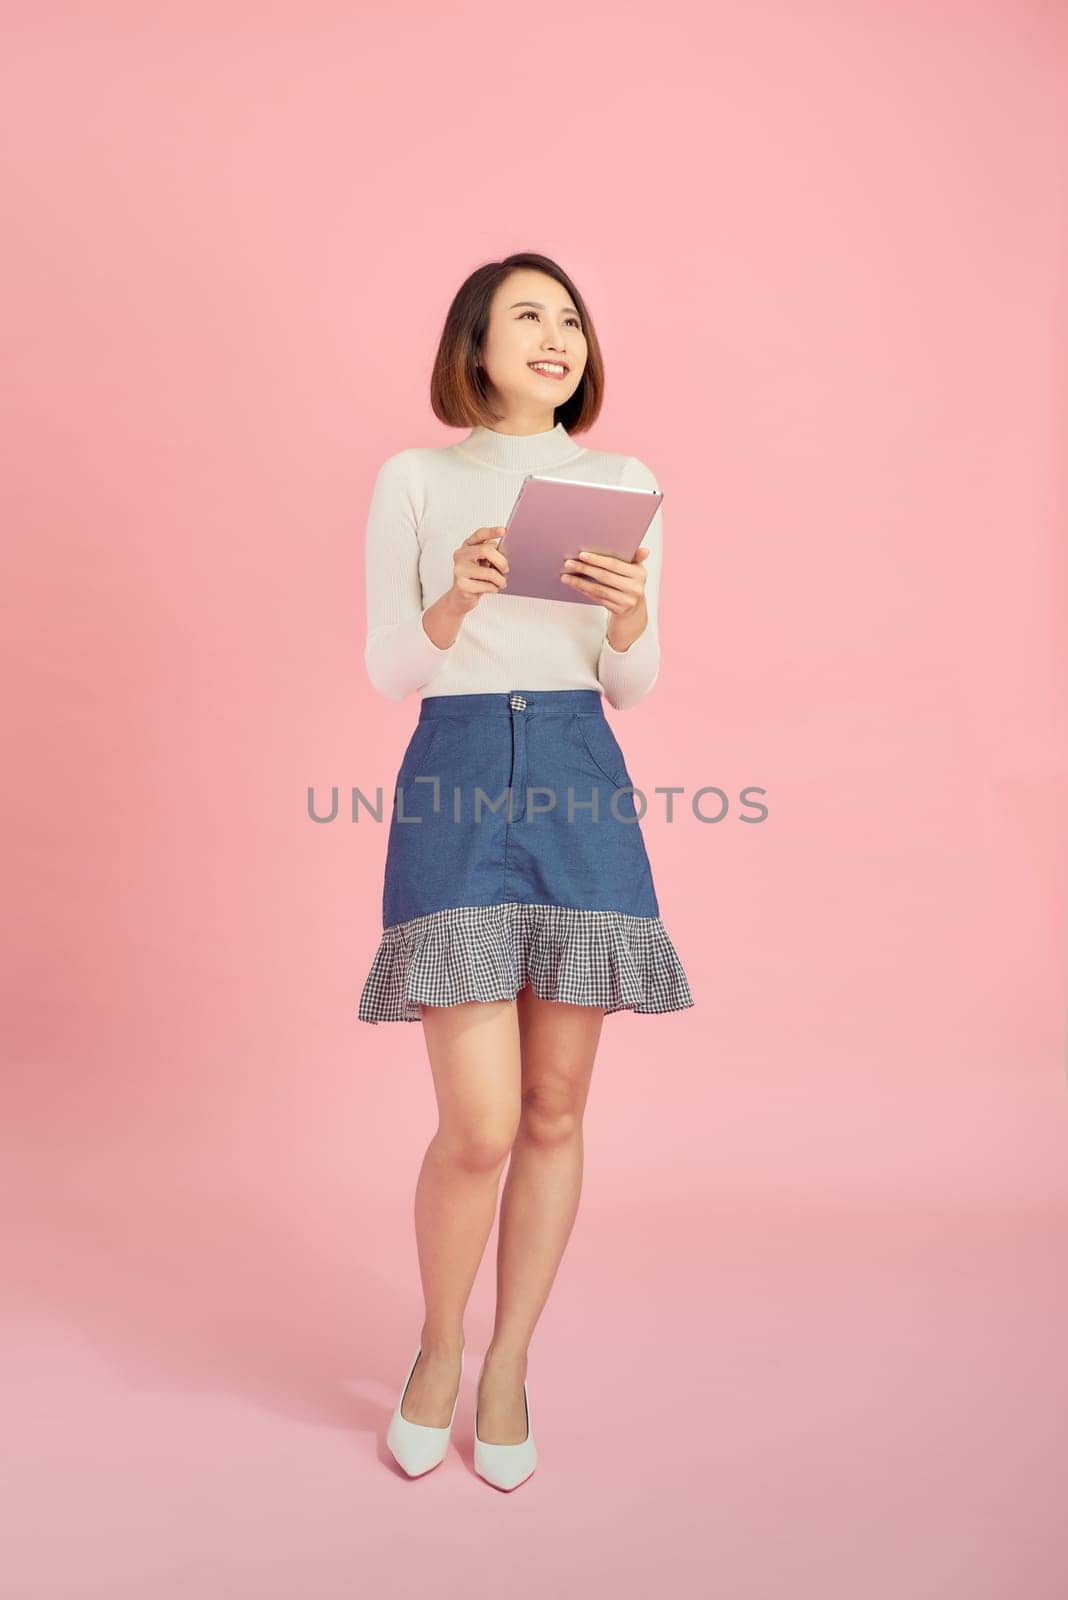 Young Asian woman reading book while standing over pink background. by makidotvn